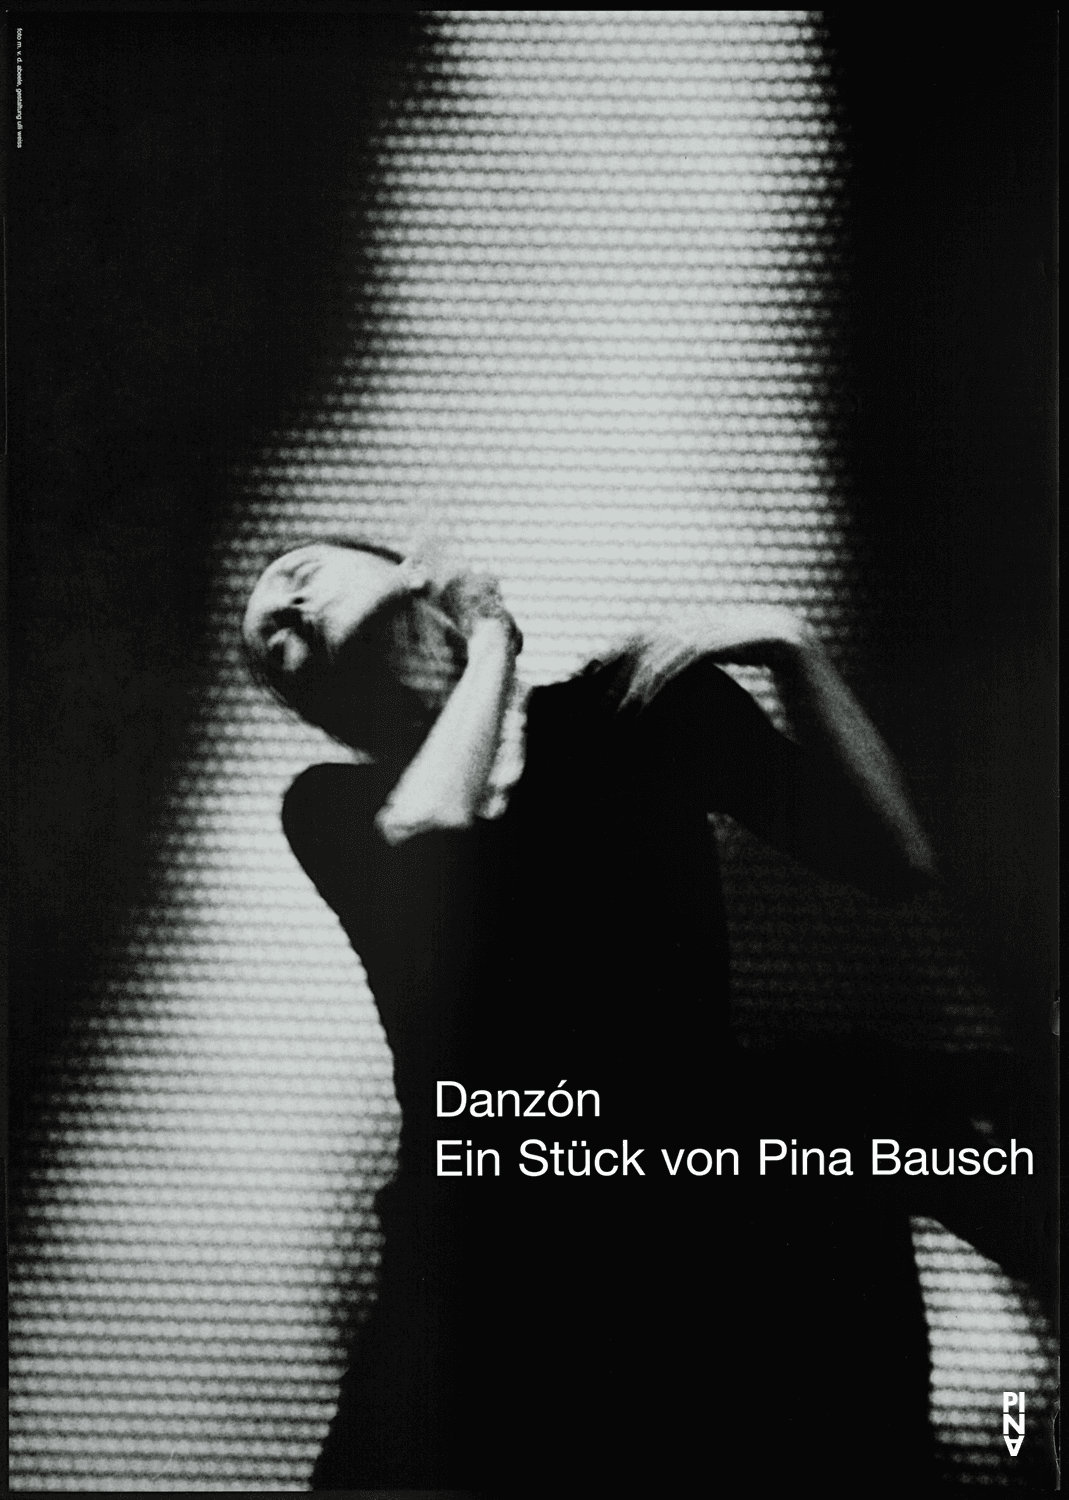 Poster for “Danzón” by Pina Bausch